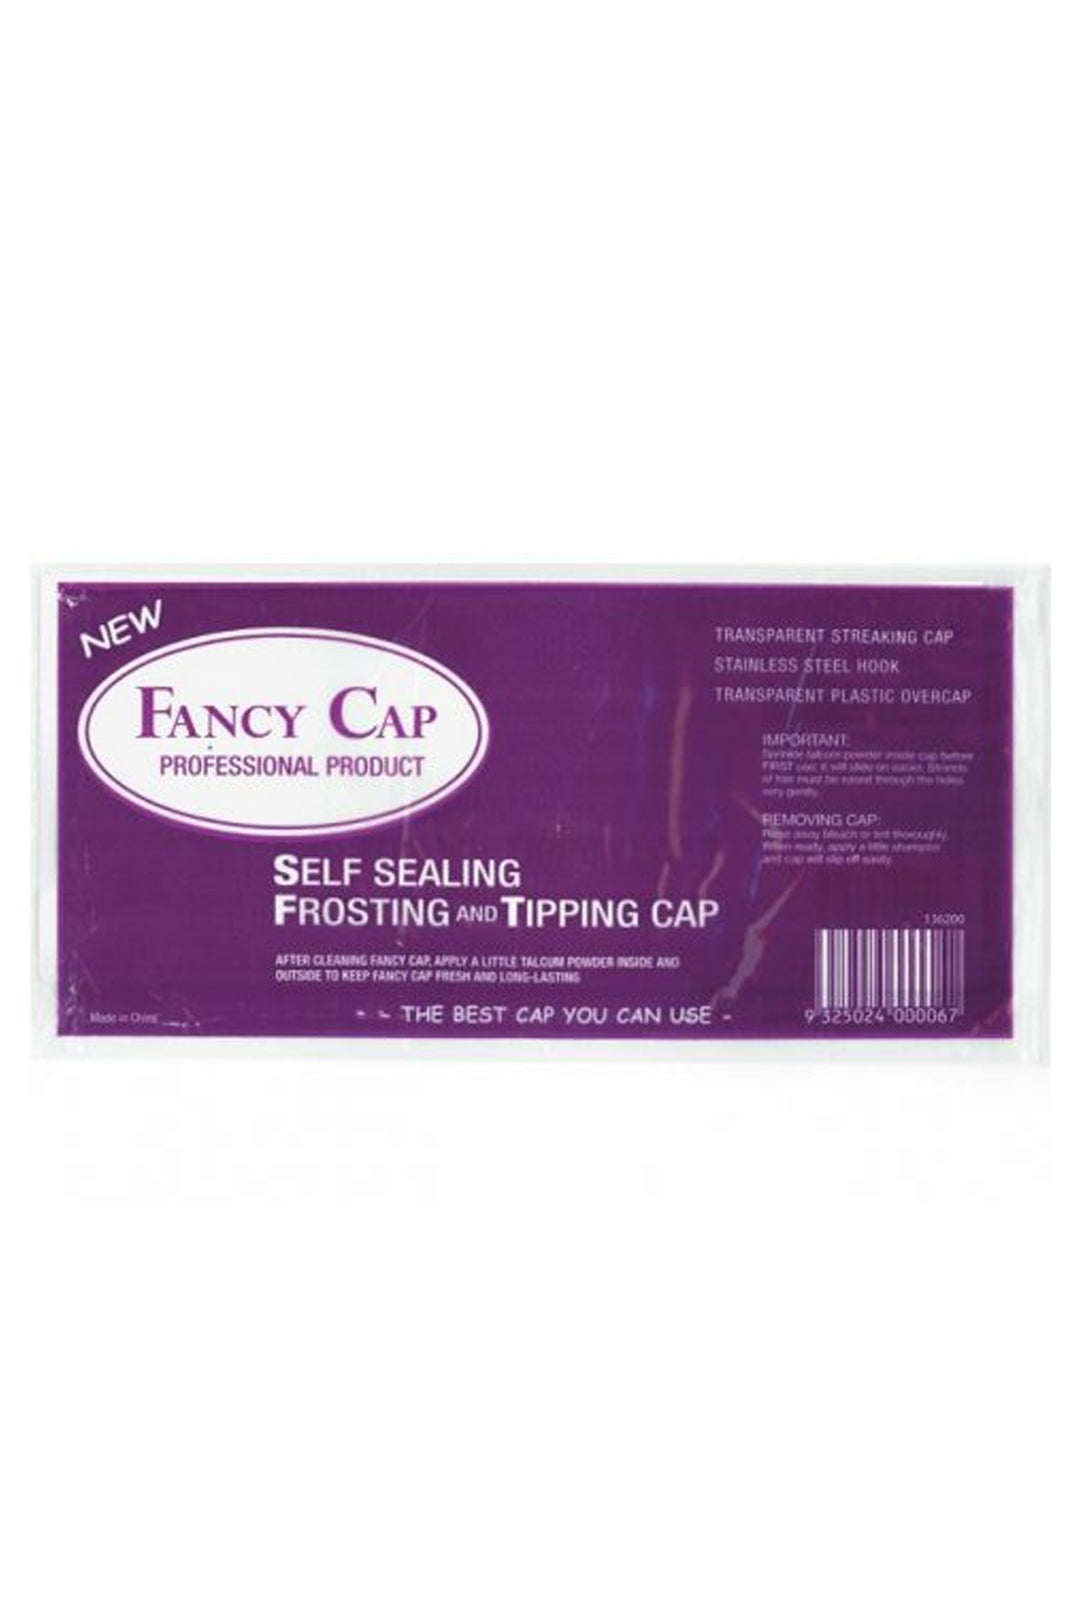 FANCYCAP SELF SEALING FROSTING AND TIPPING CAP